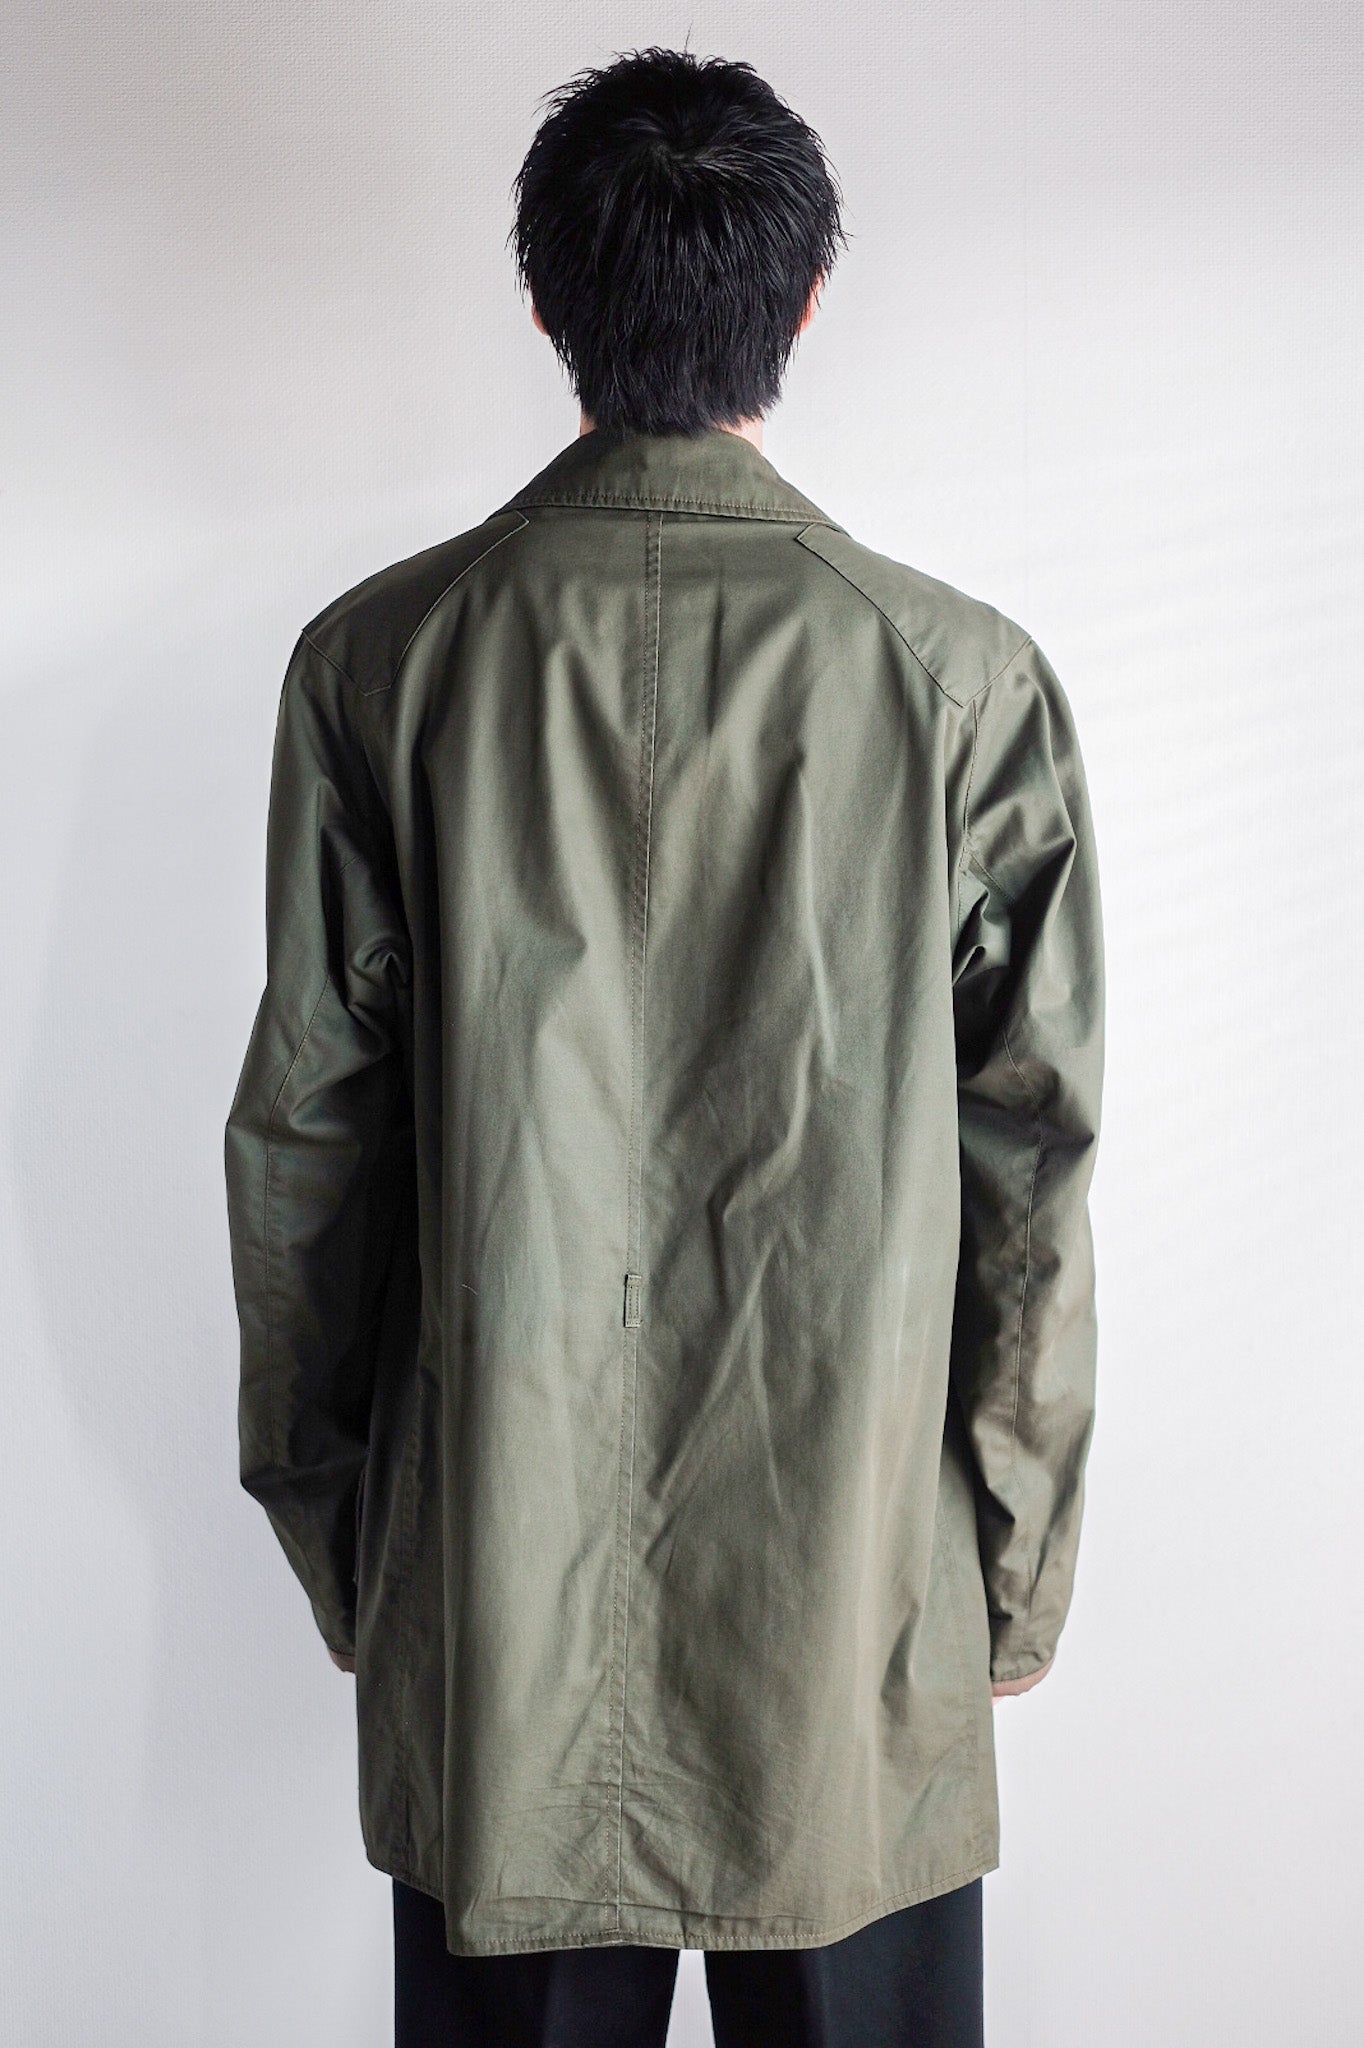 [~ 60's] Vintage Grenfell Shooter Jacket “Mountain Tag”